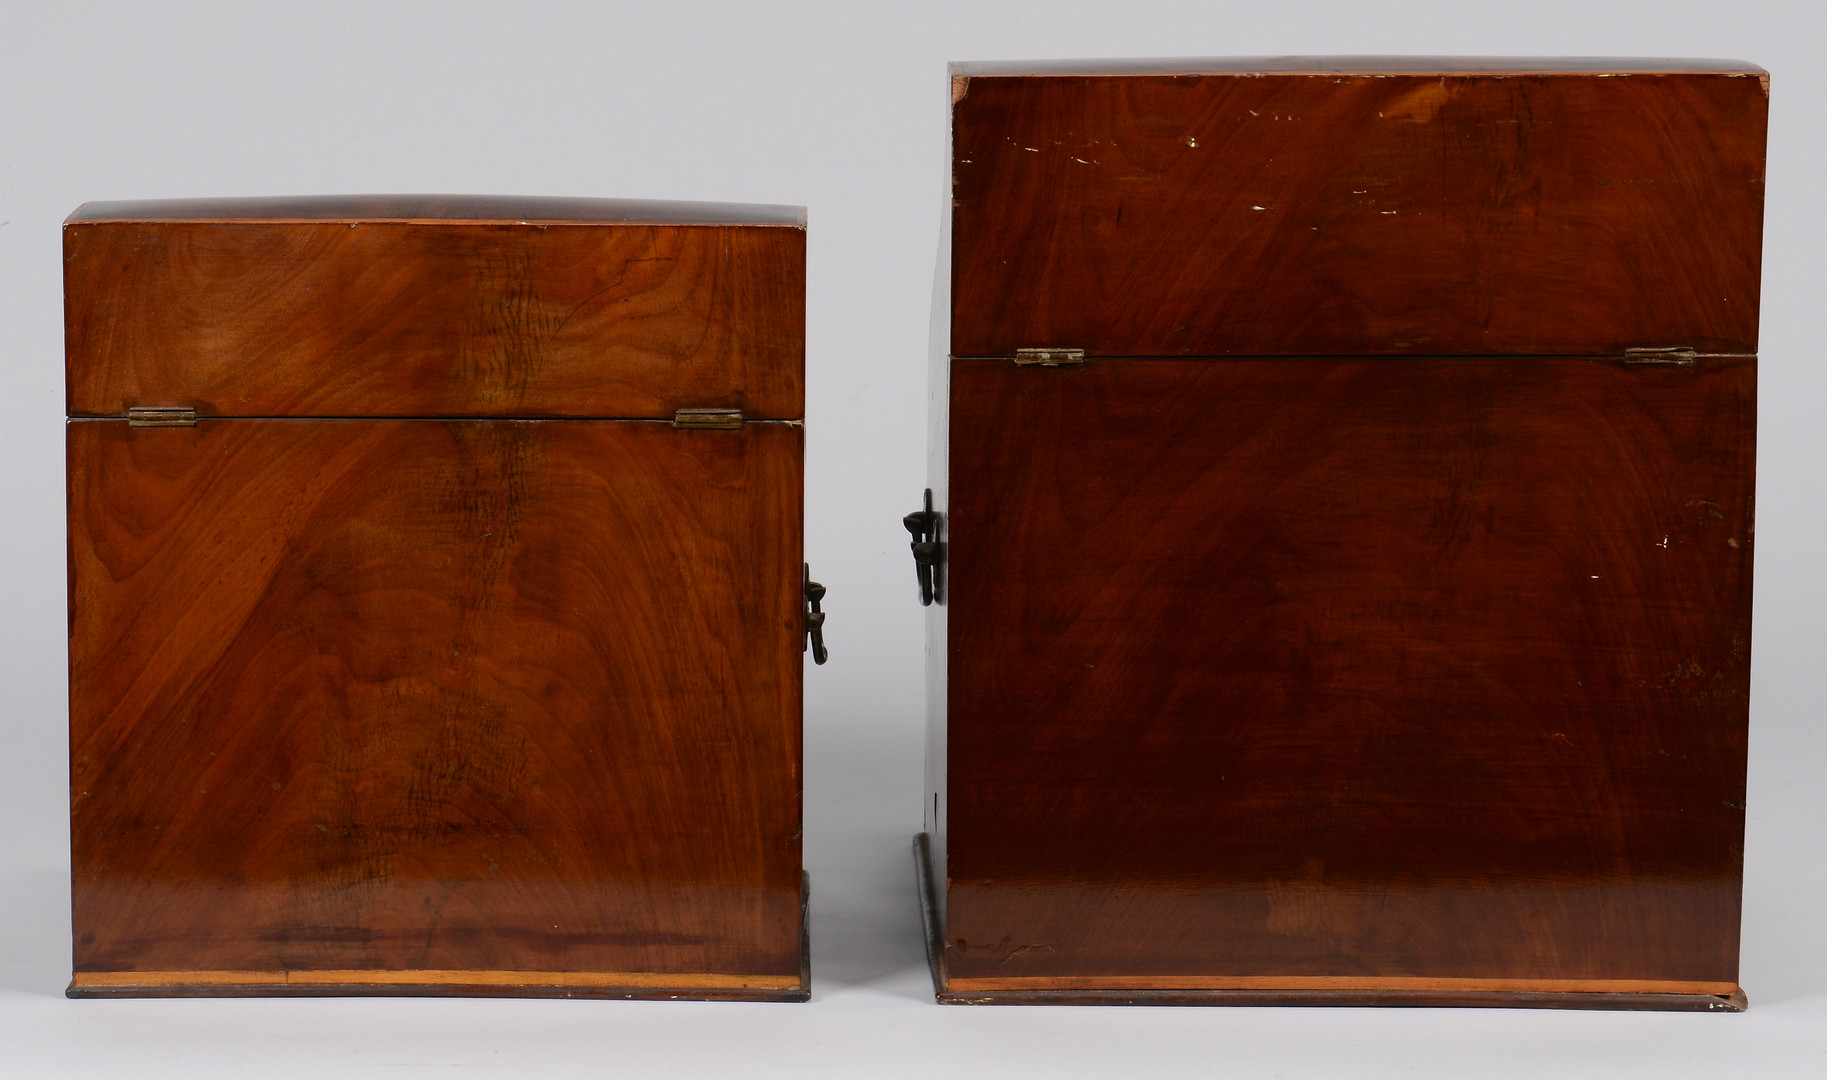 Lot 157: Two Knife Boxes, c.1830